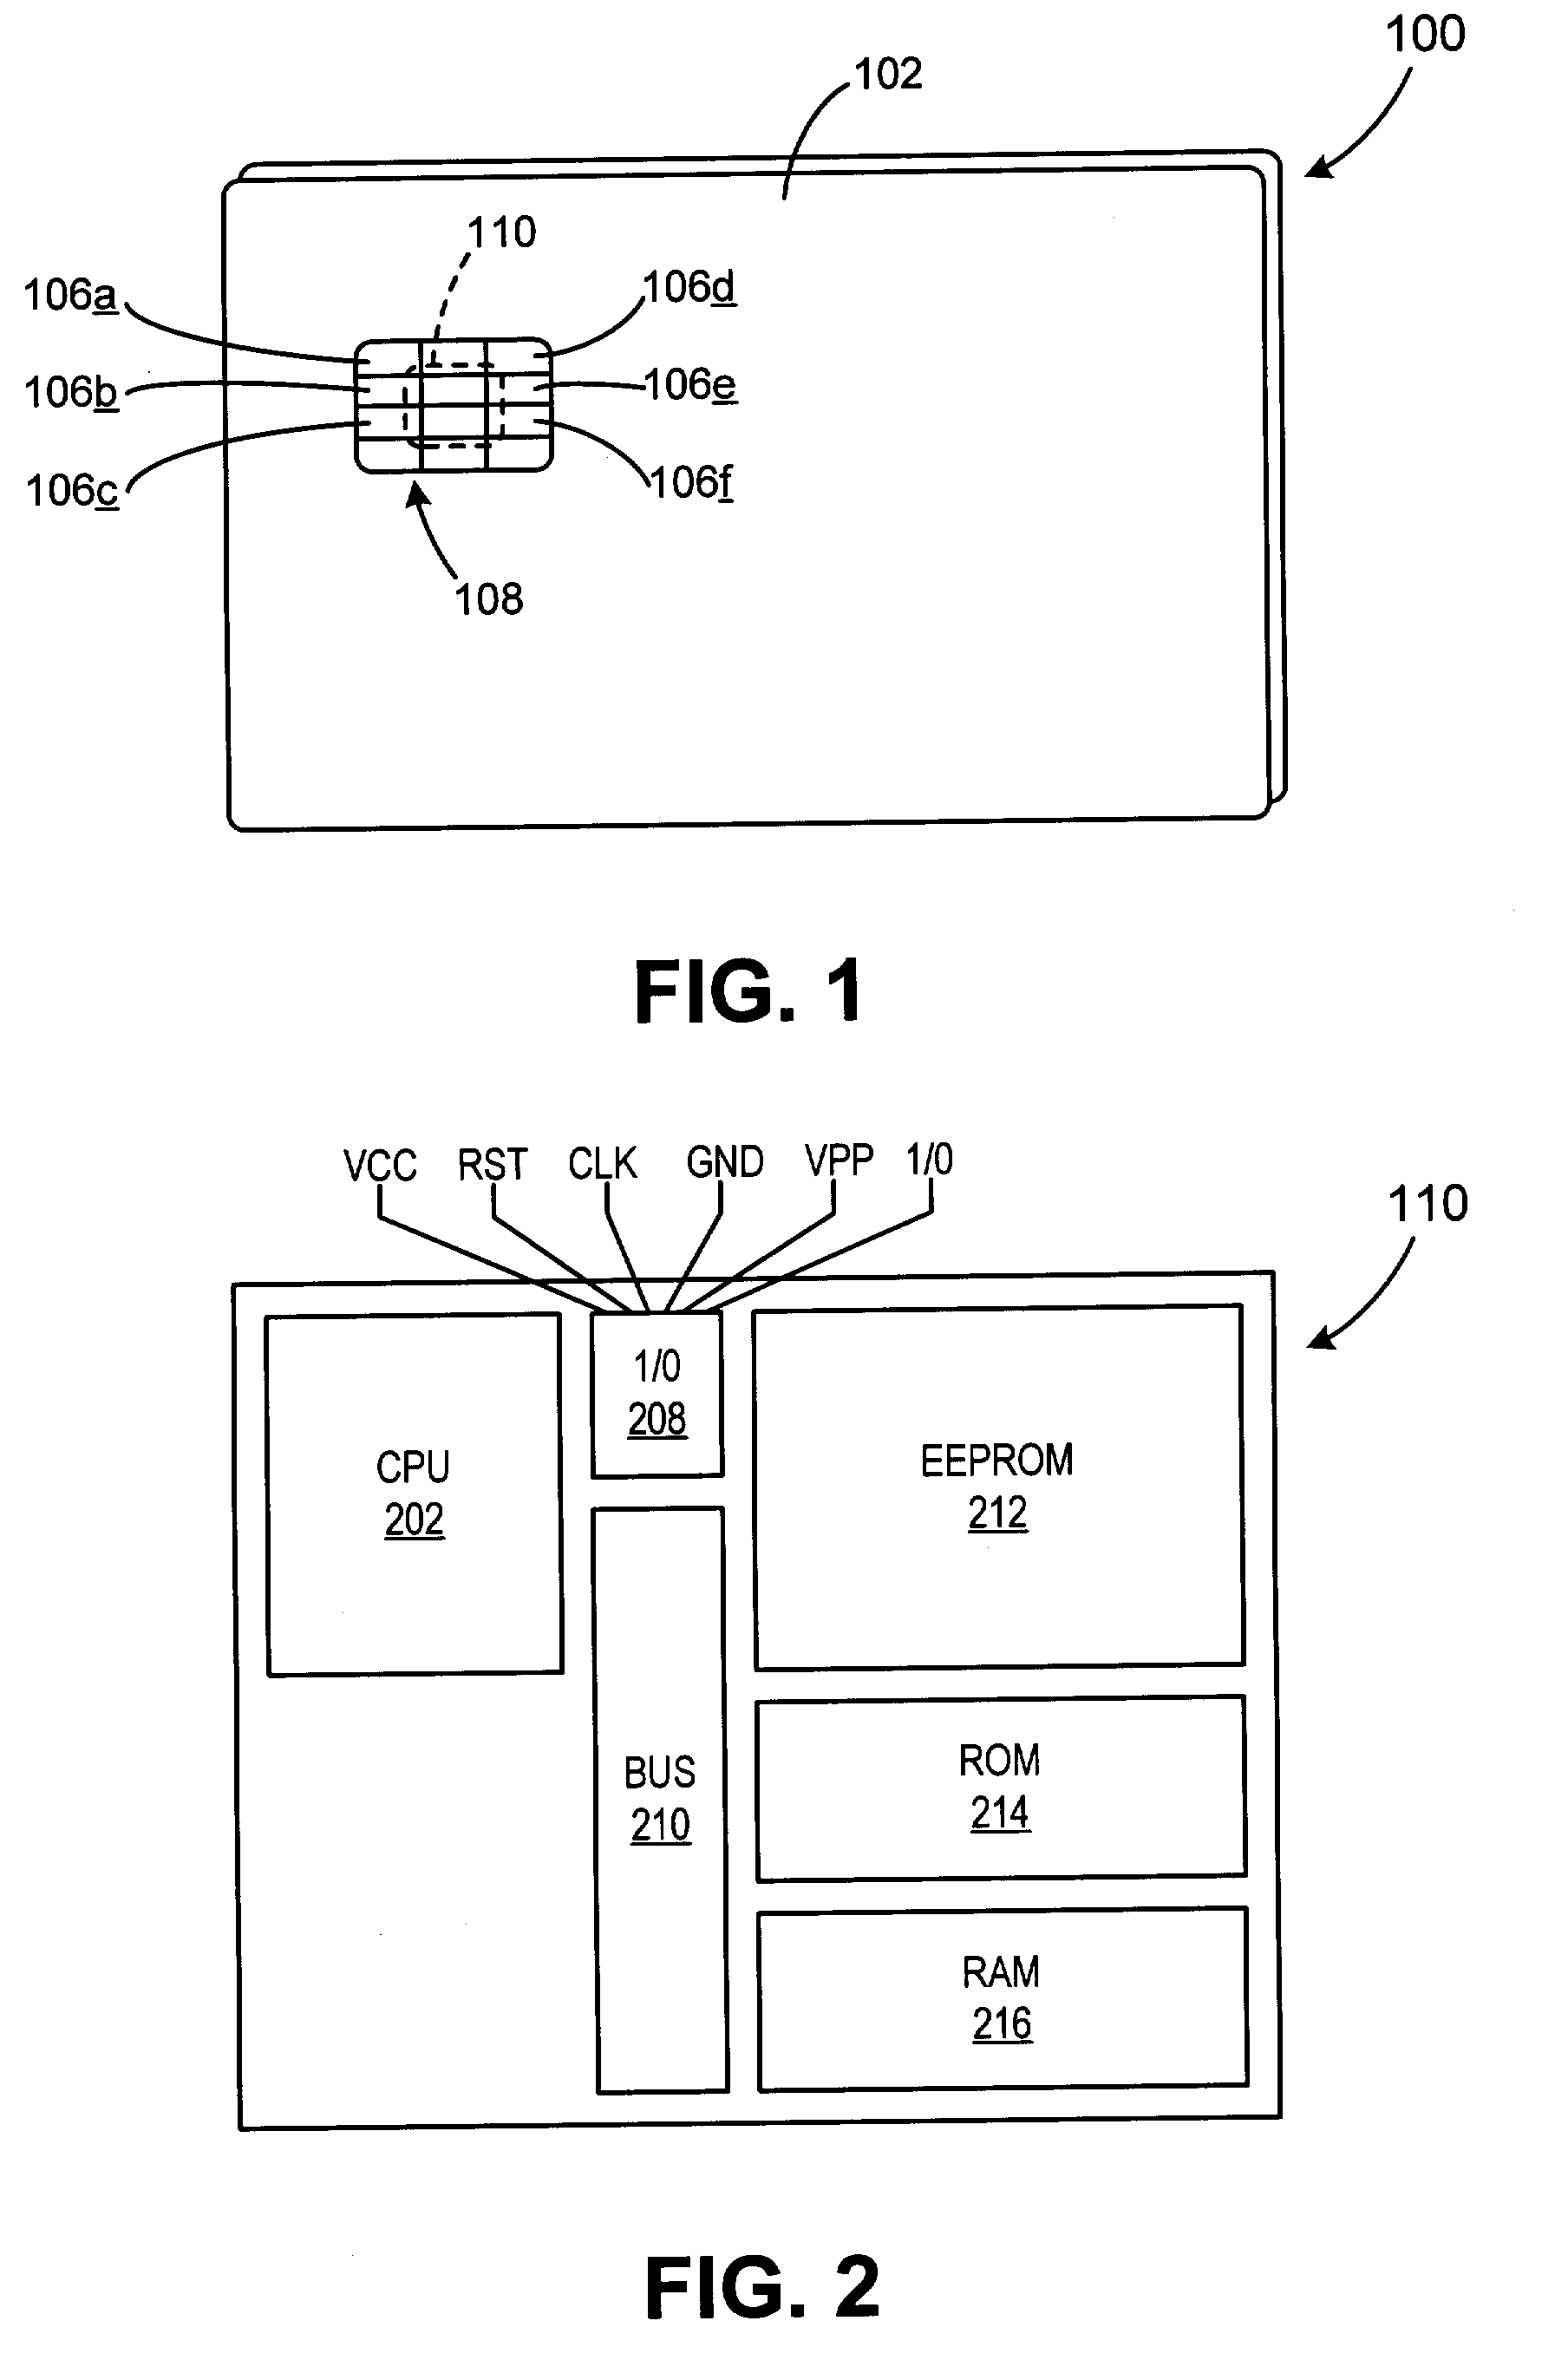 Method for registering a biometric for use with a smartcard-reader system